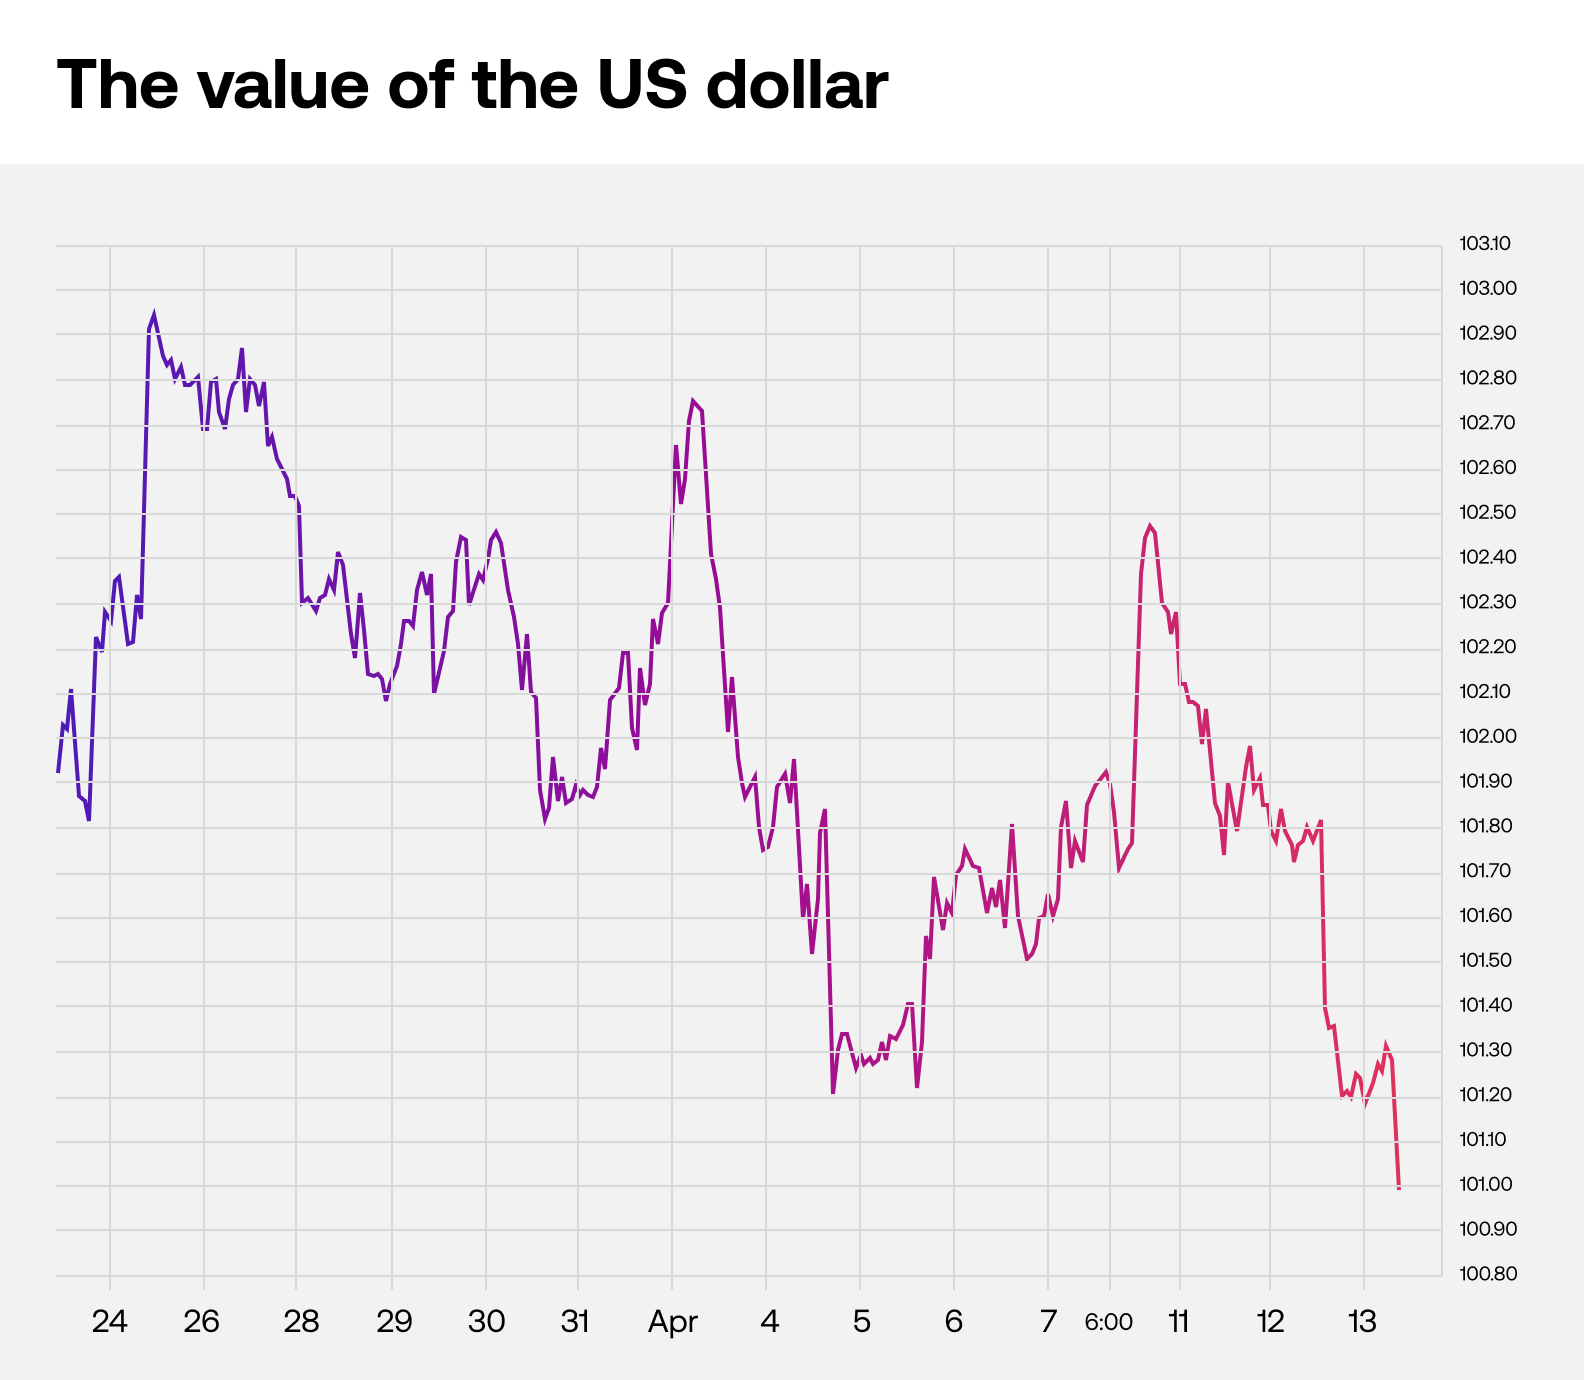 The value of the US dollar